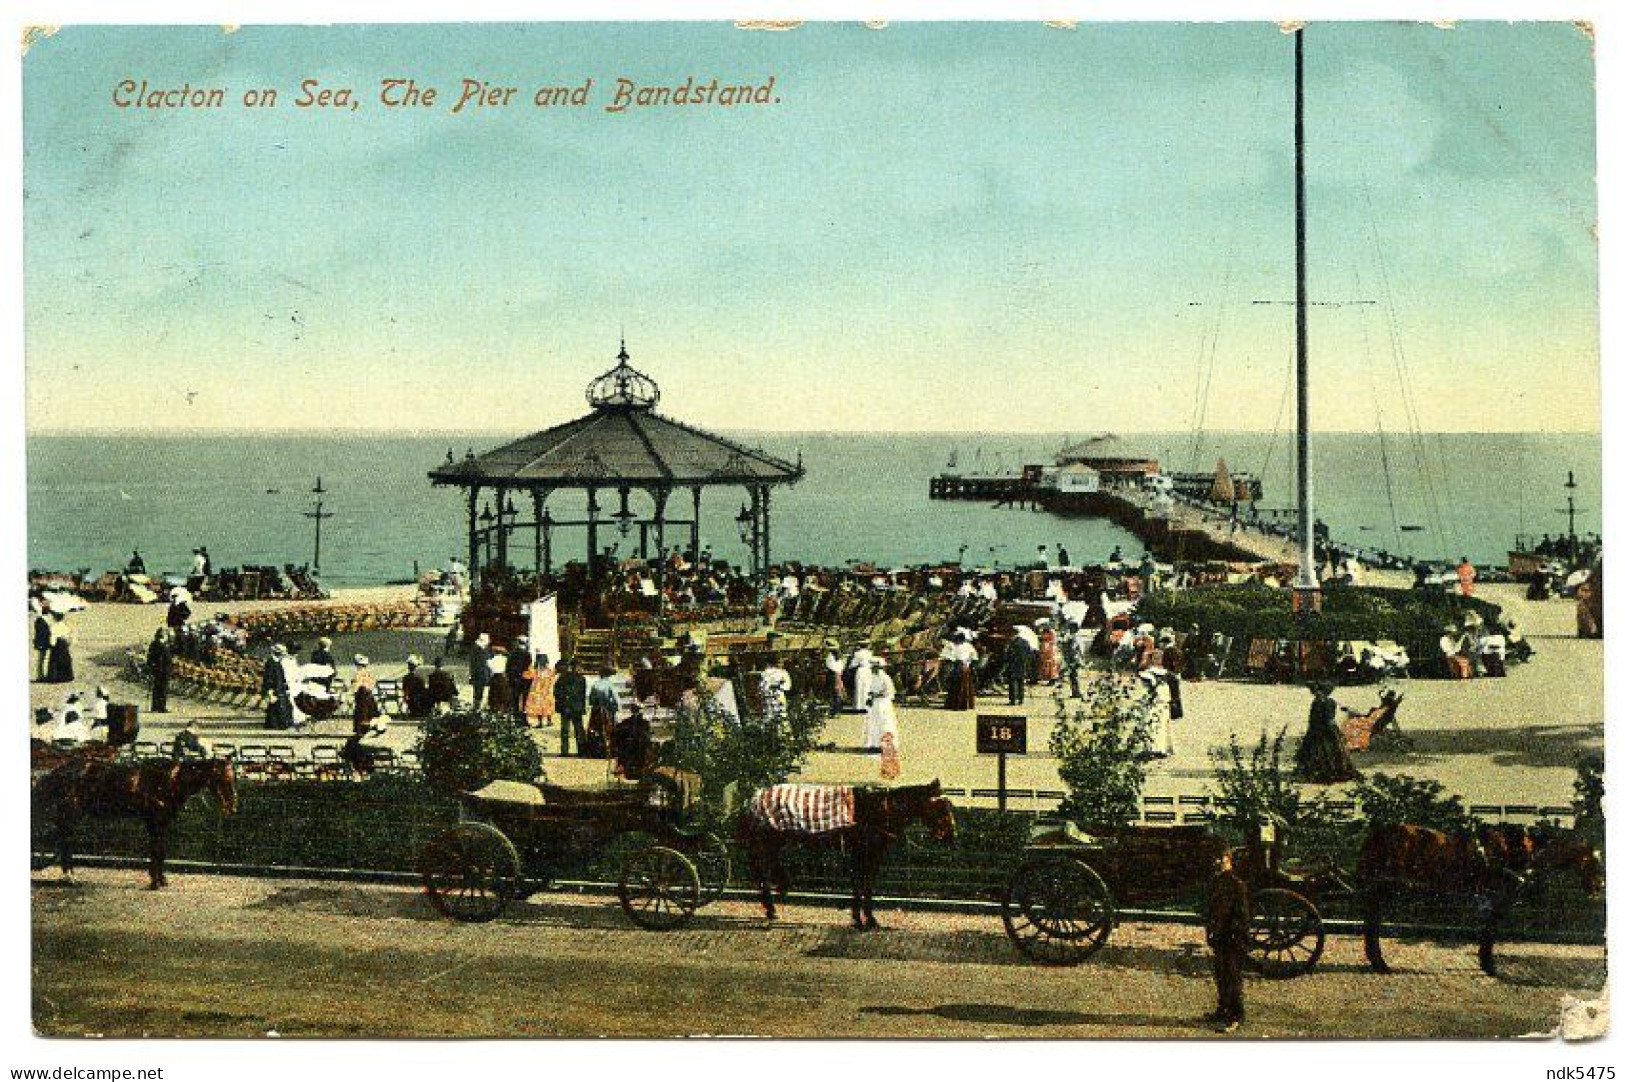 CLACTON ON SEA : THE PIER AND BANDSTAND / CRANBROOK, SISSINGHURST, WALNUT TREE COTTAGE (LING) - Clacton On Sea